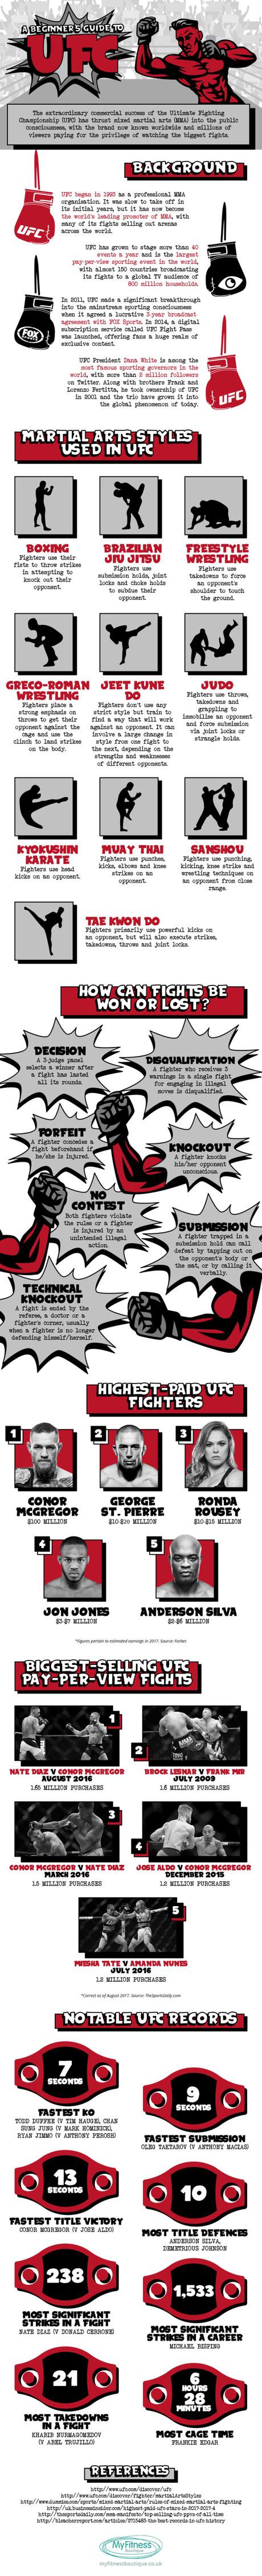 Infographic: A Beginner’s Guide to UFC